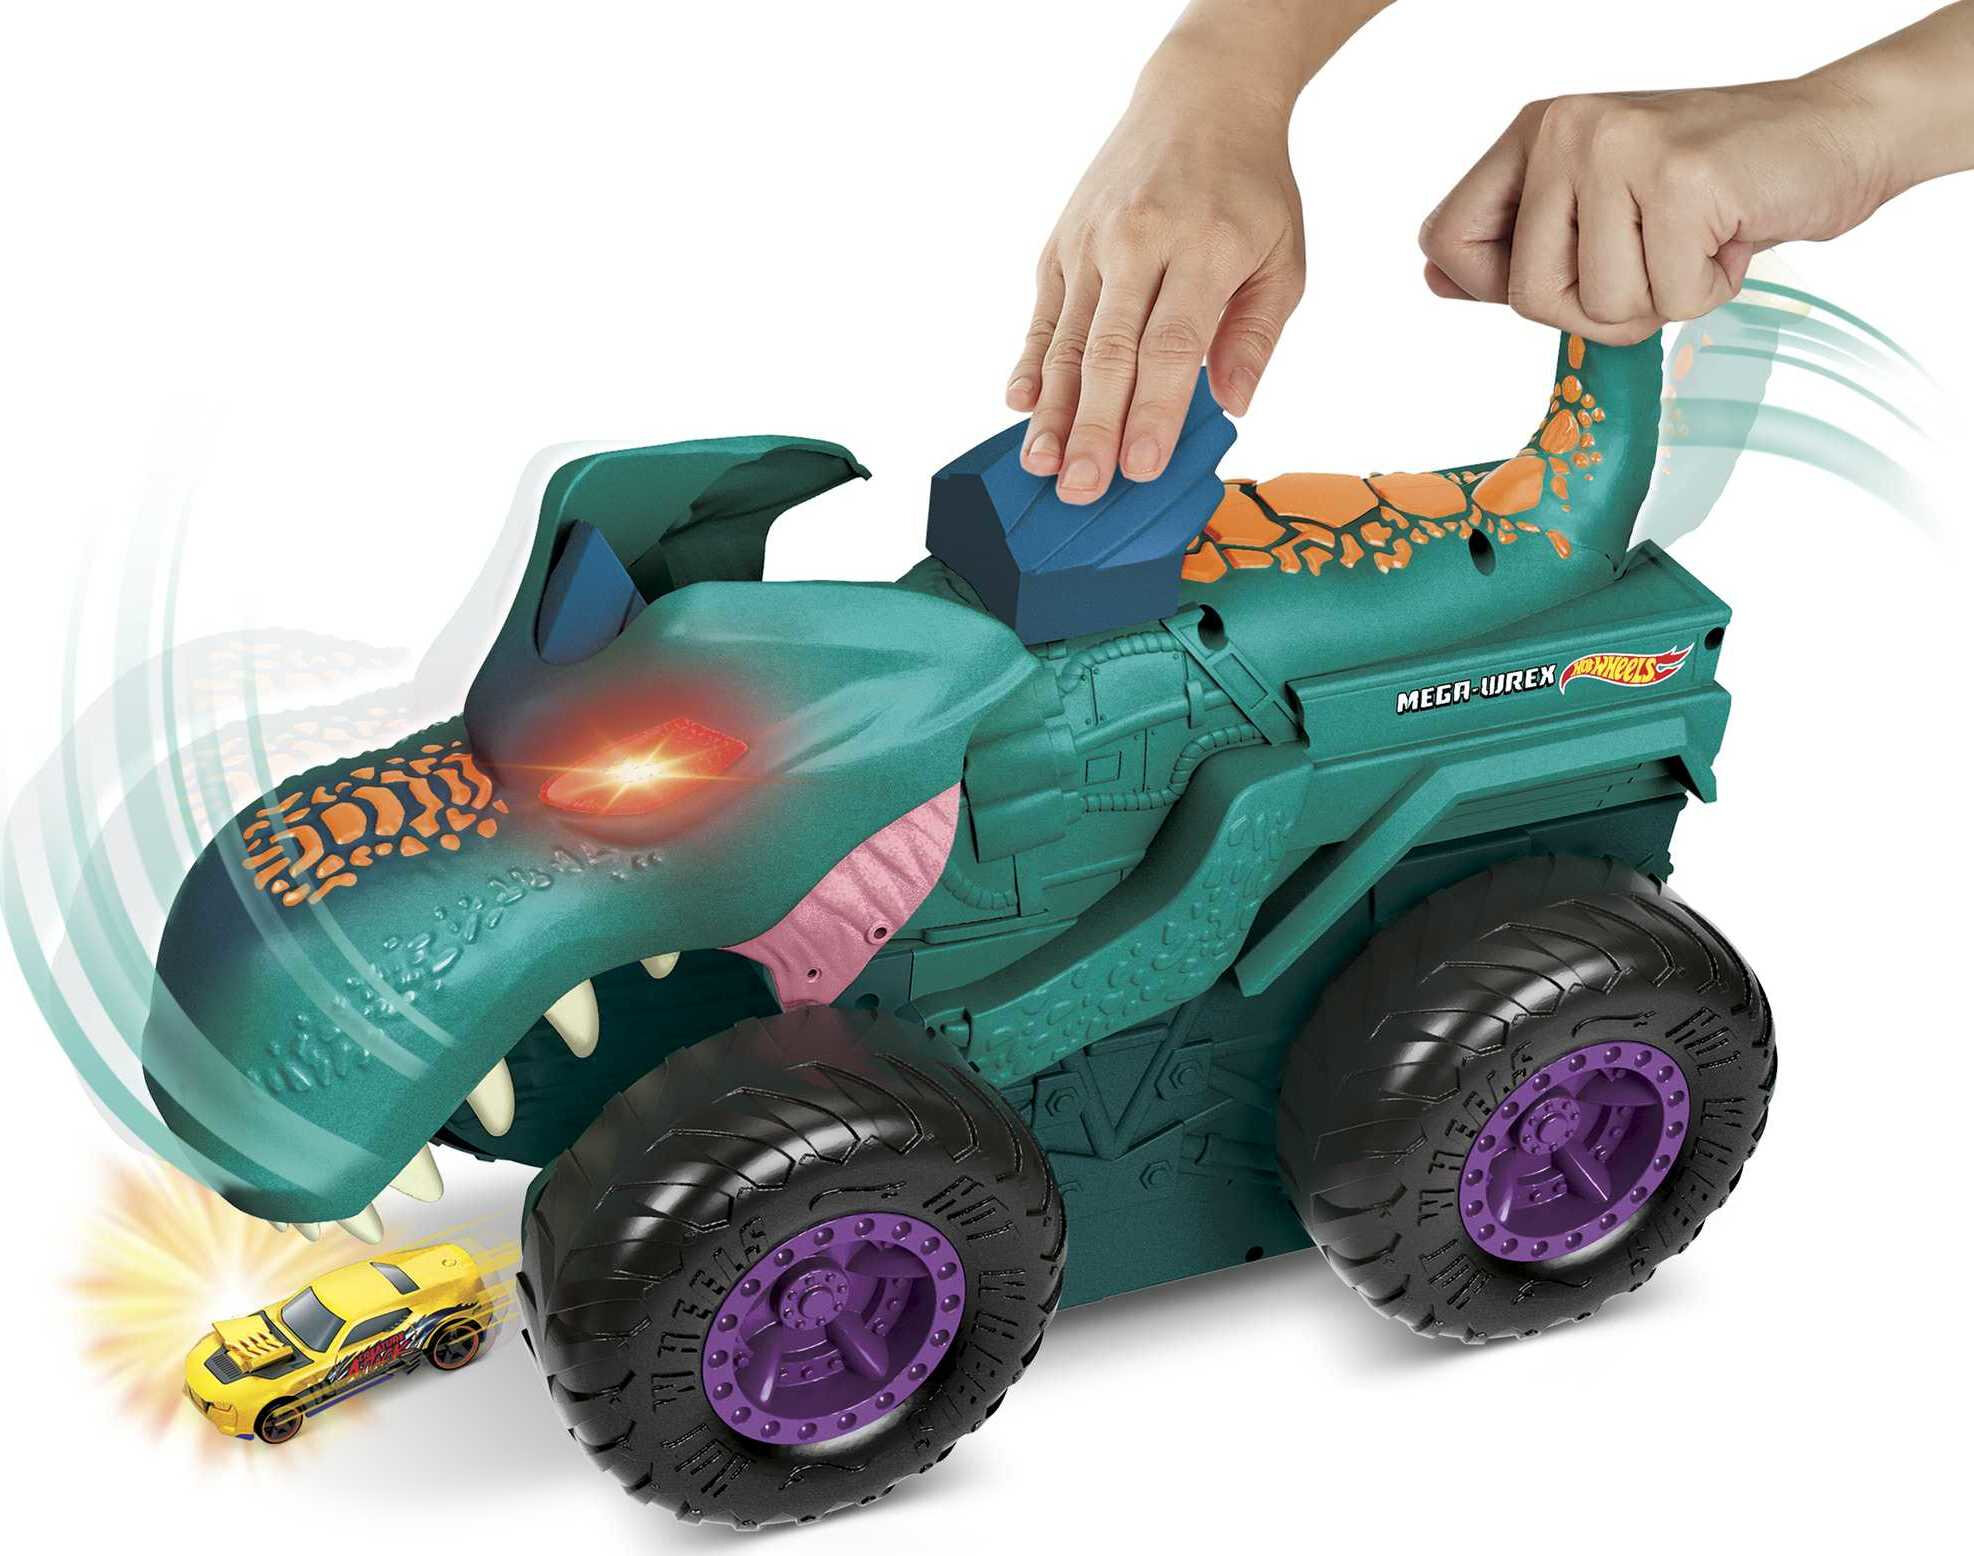 Hot Wheels Monster Trucks Car Chompin’ Mega Wrex Vehicle, for Ages 3 Years & Up - image 5 of 7